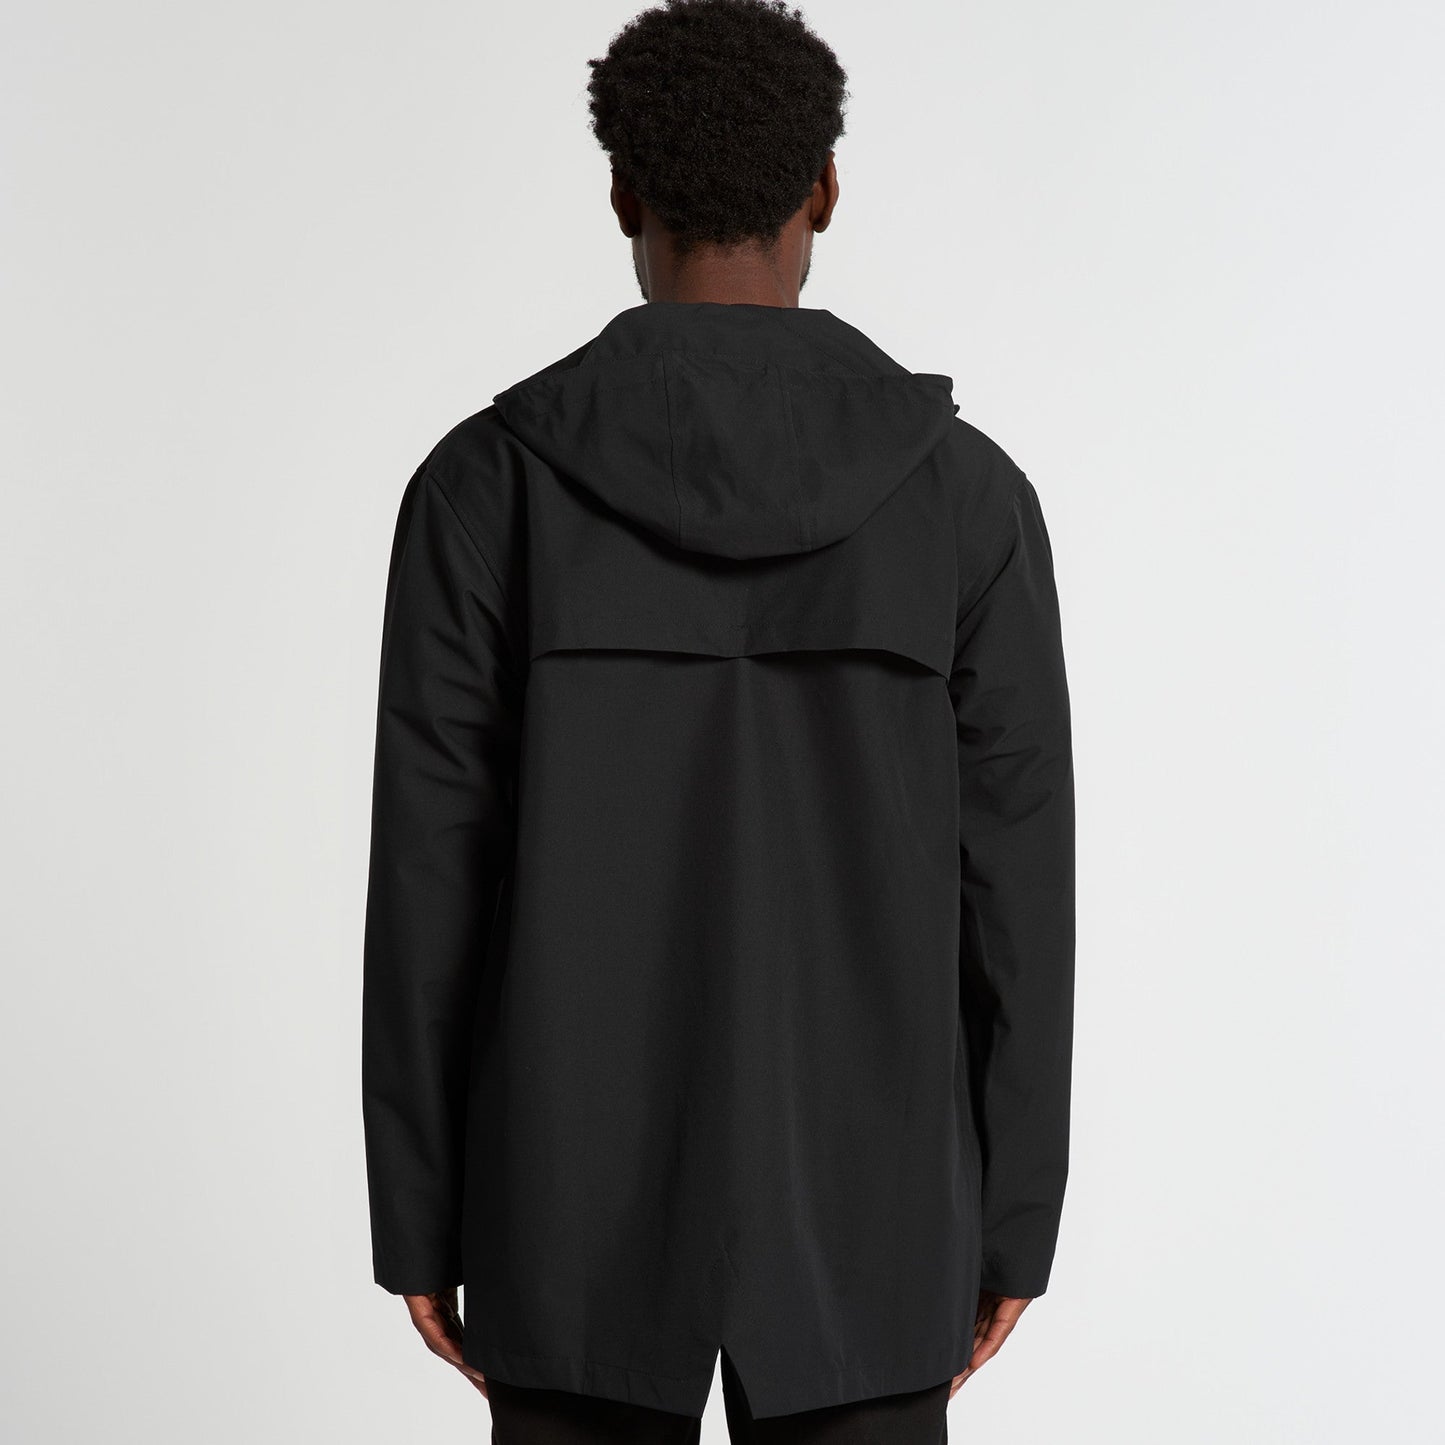 Mens Tech Jacket | Recycled Polyester AS Colour